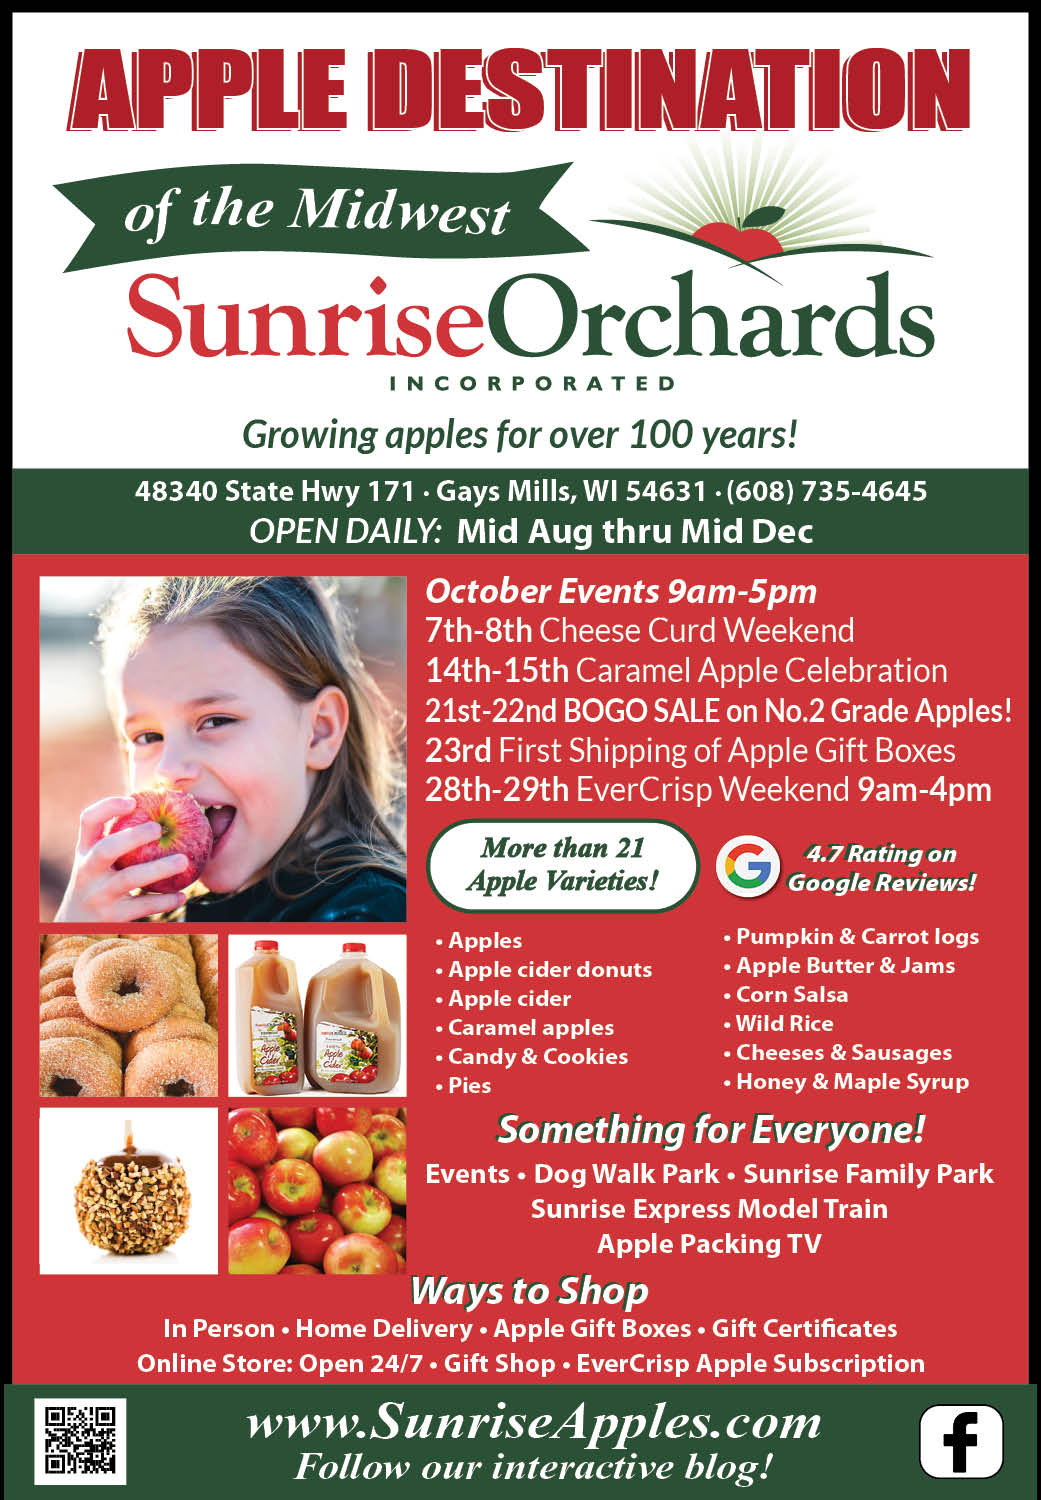 Join us for Sunrise Orchards October Events!